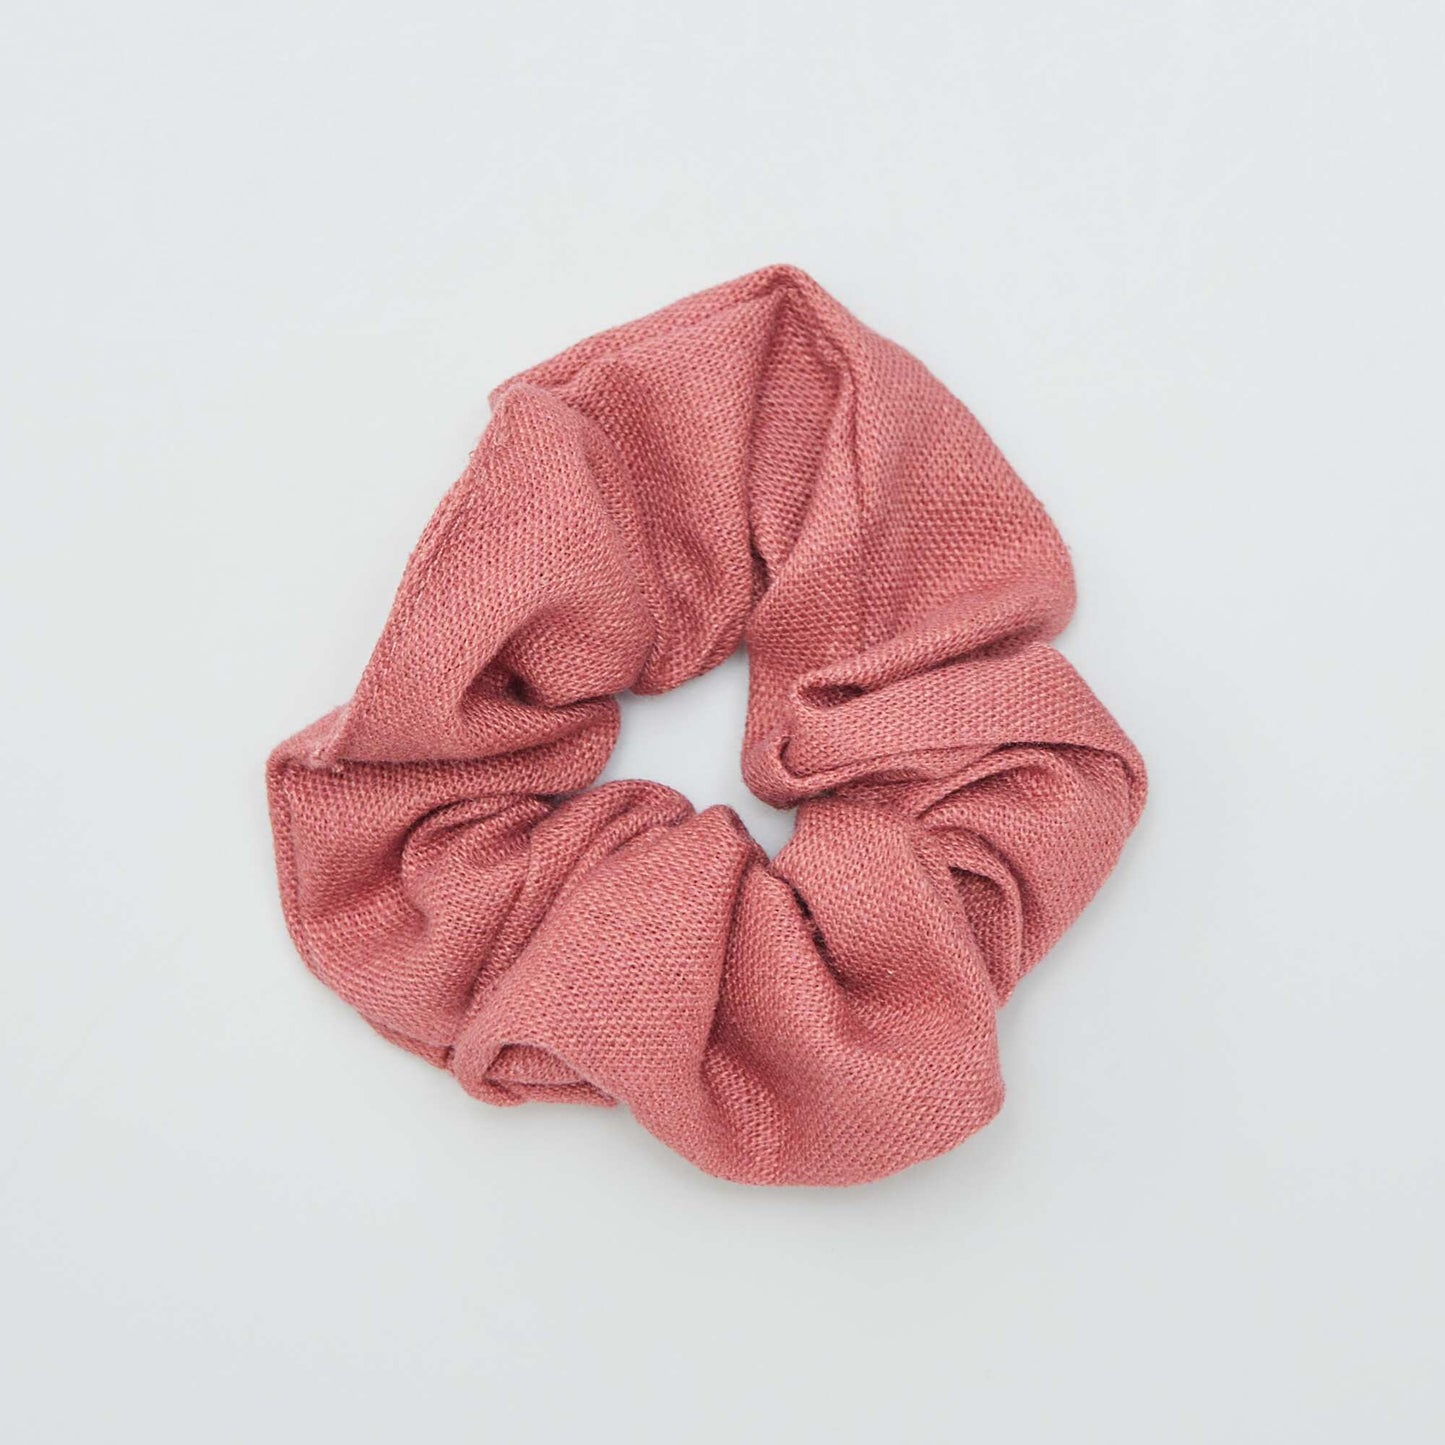 Pack of 3 scrunchies for special occasions WHITE